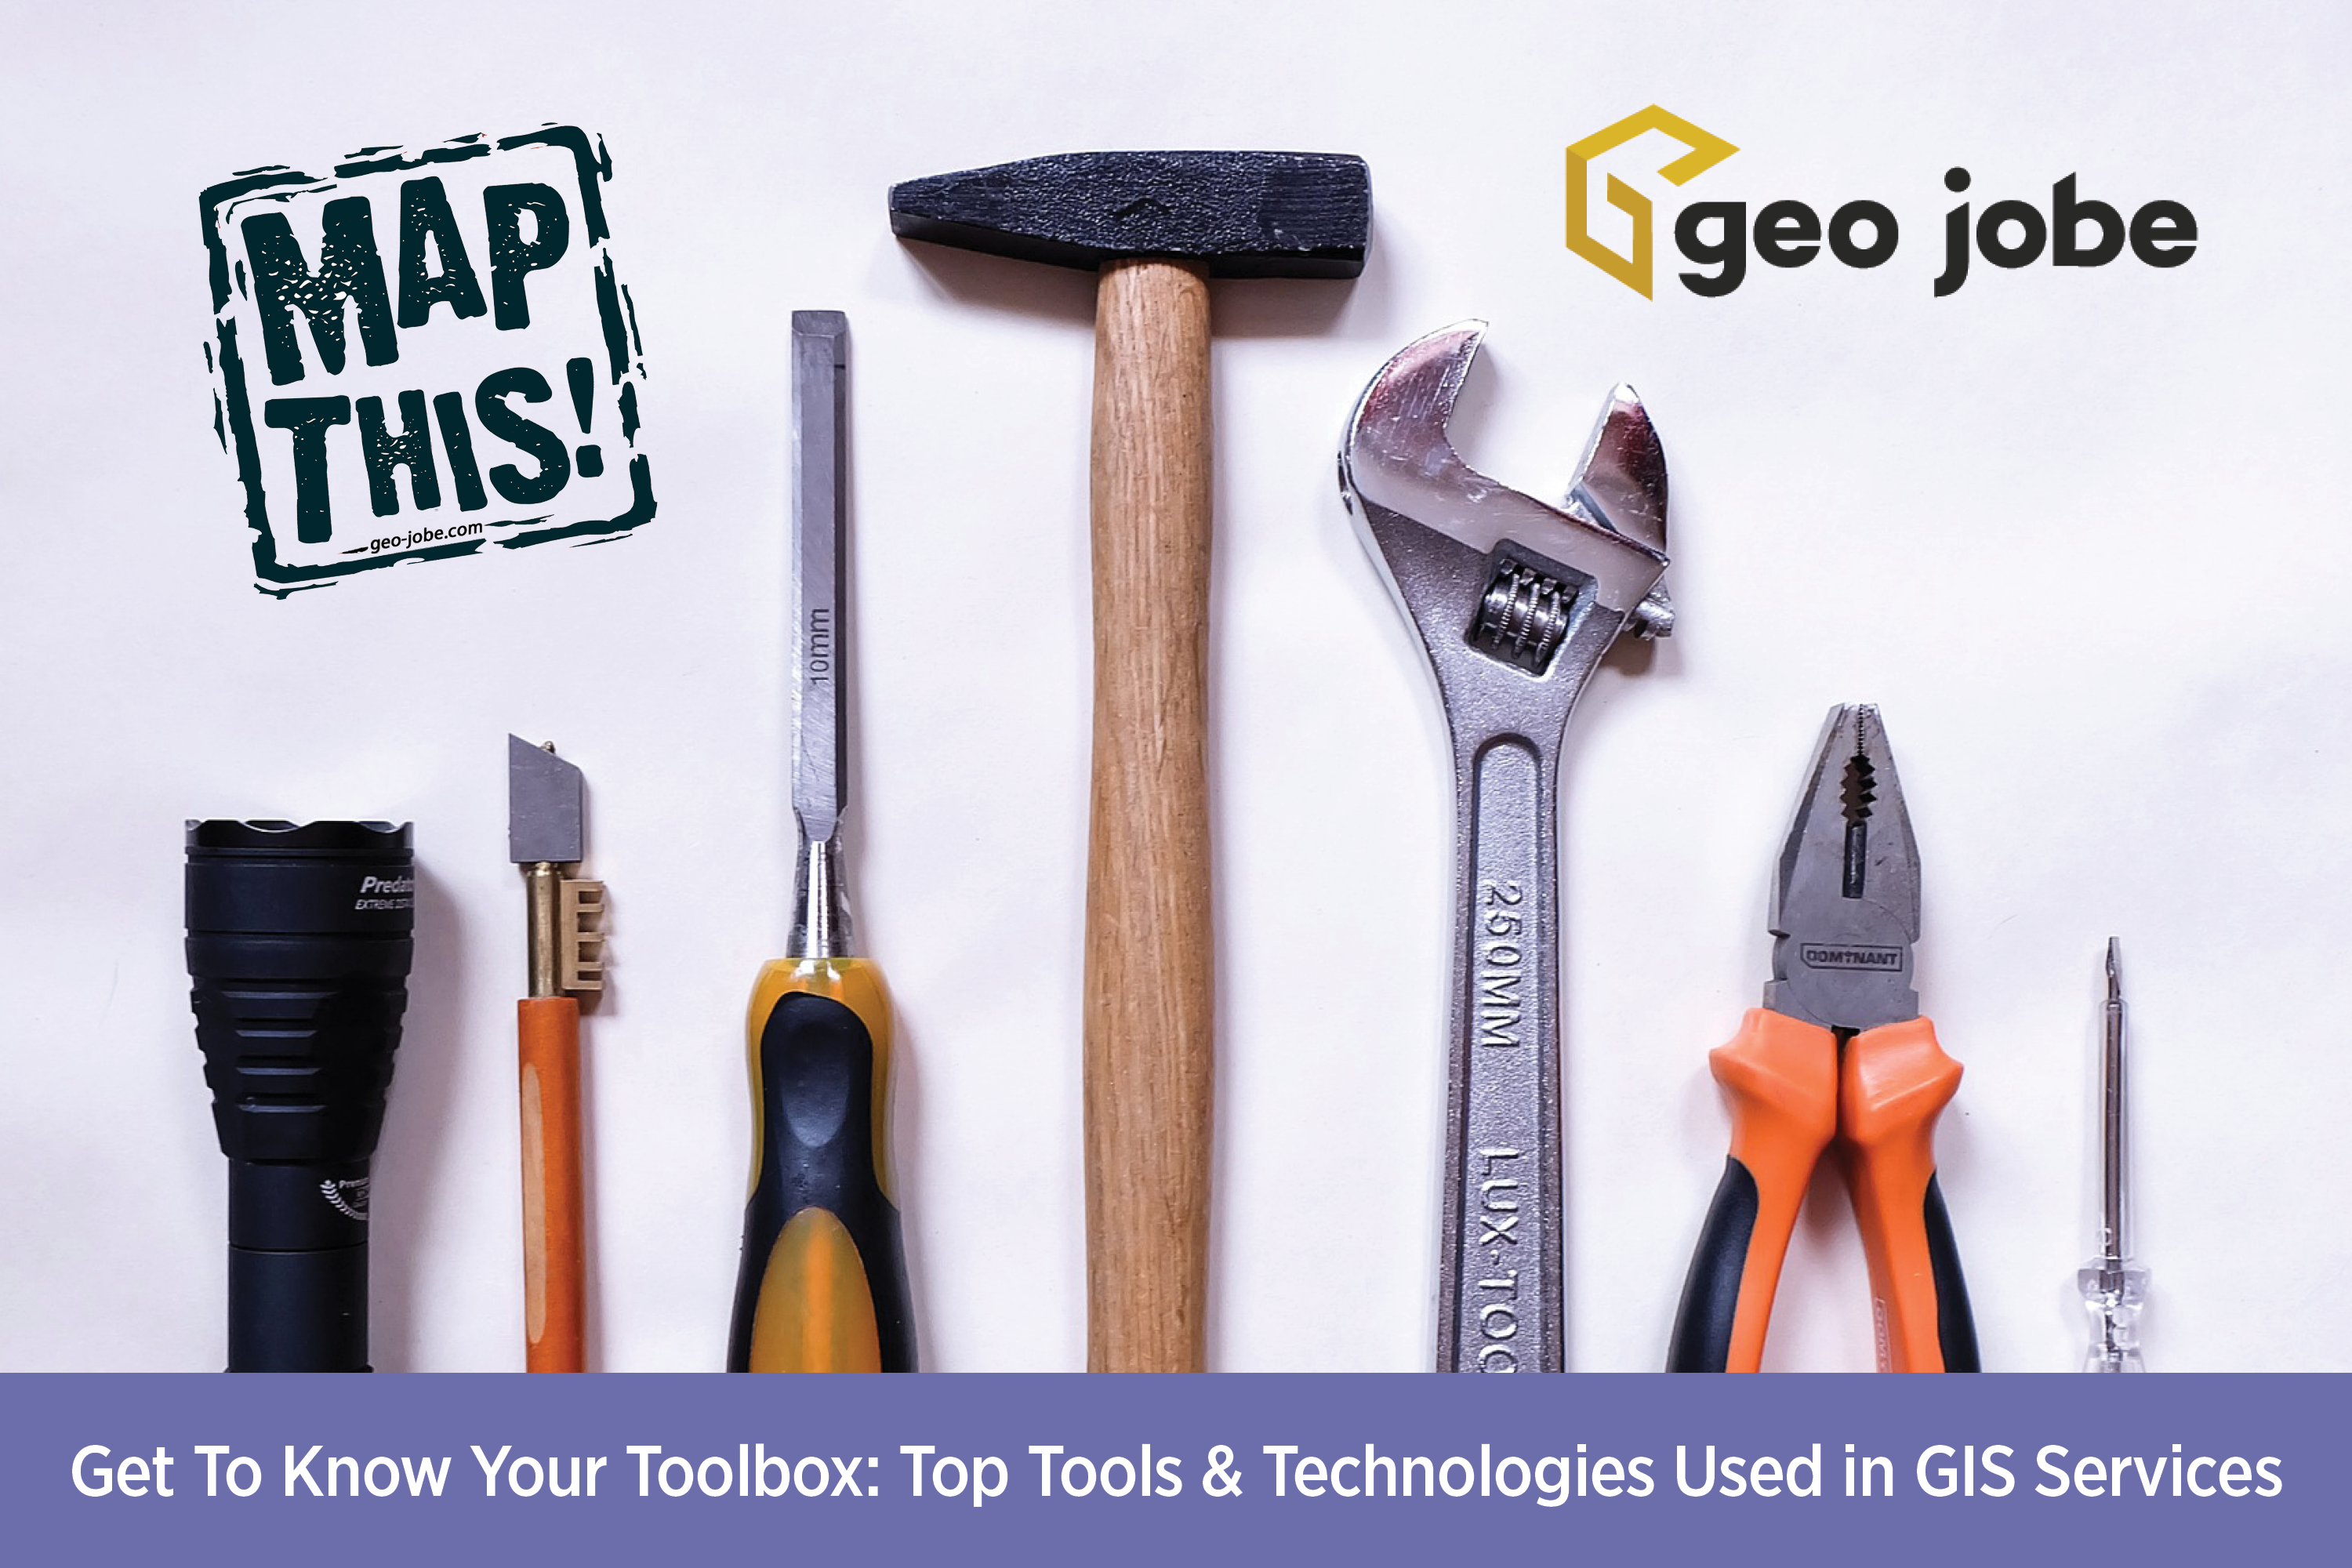 Get To Know Your Toolbox: Top Tools & Technologies Used in GIS Services